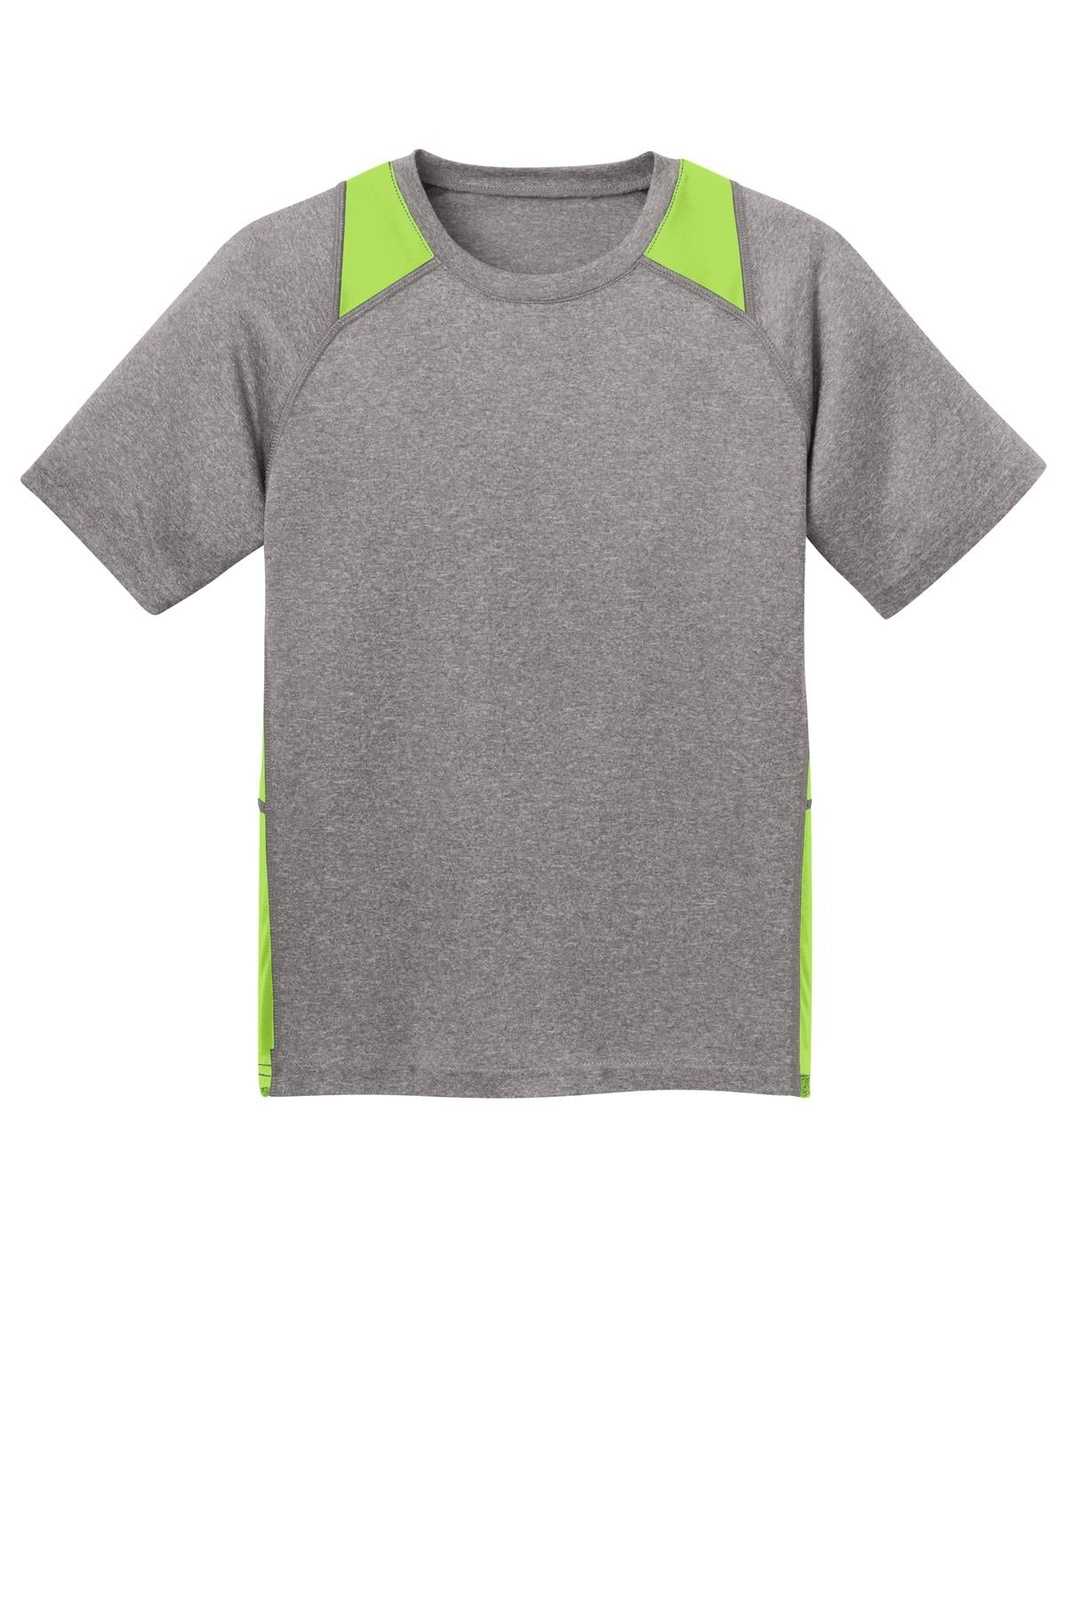 Sport-Tek YST361 Youth Heather Colorblock Contender Tee - Vintage Heather Lime Shock - HIT a Double - 2